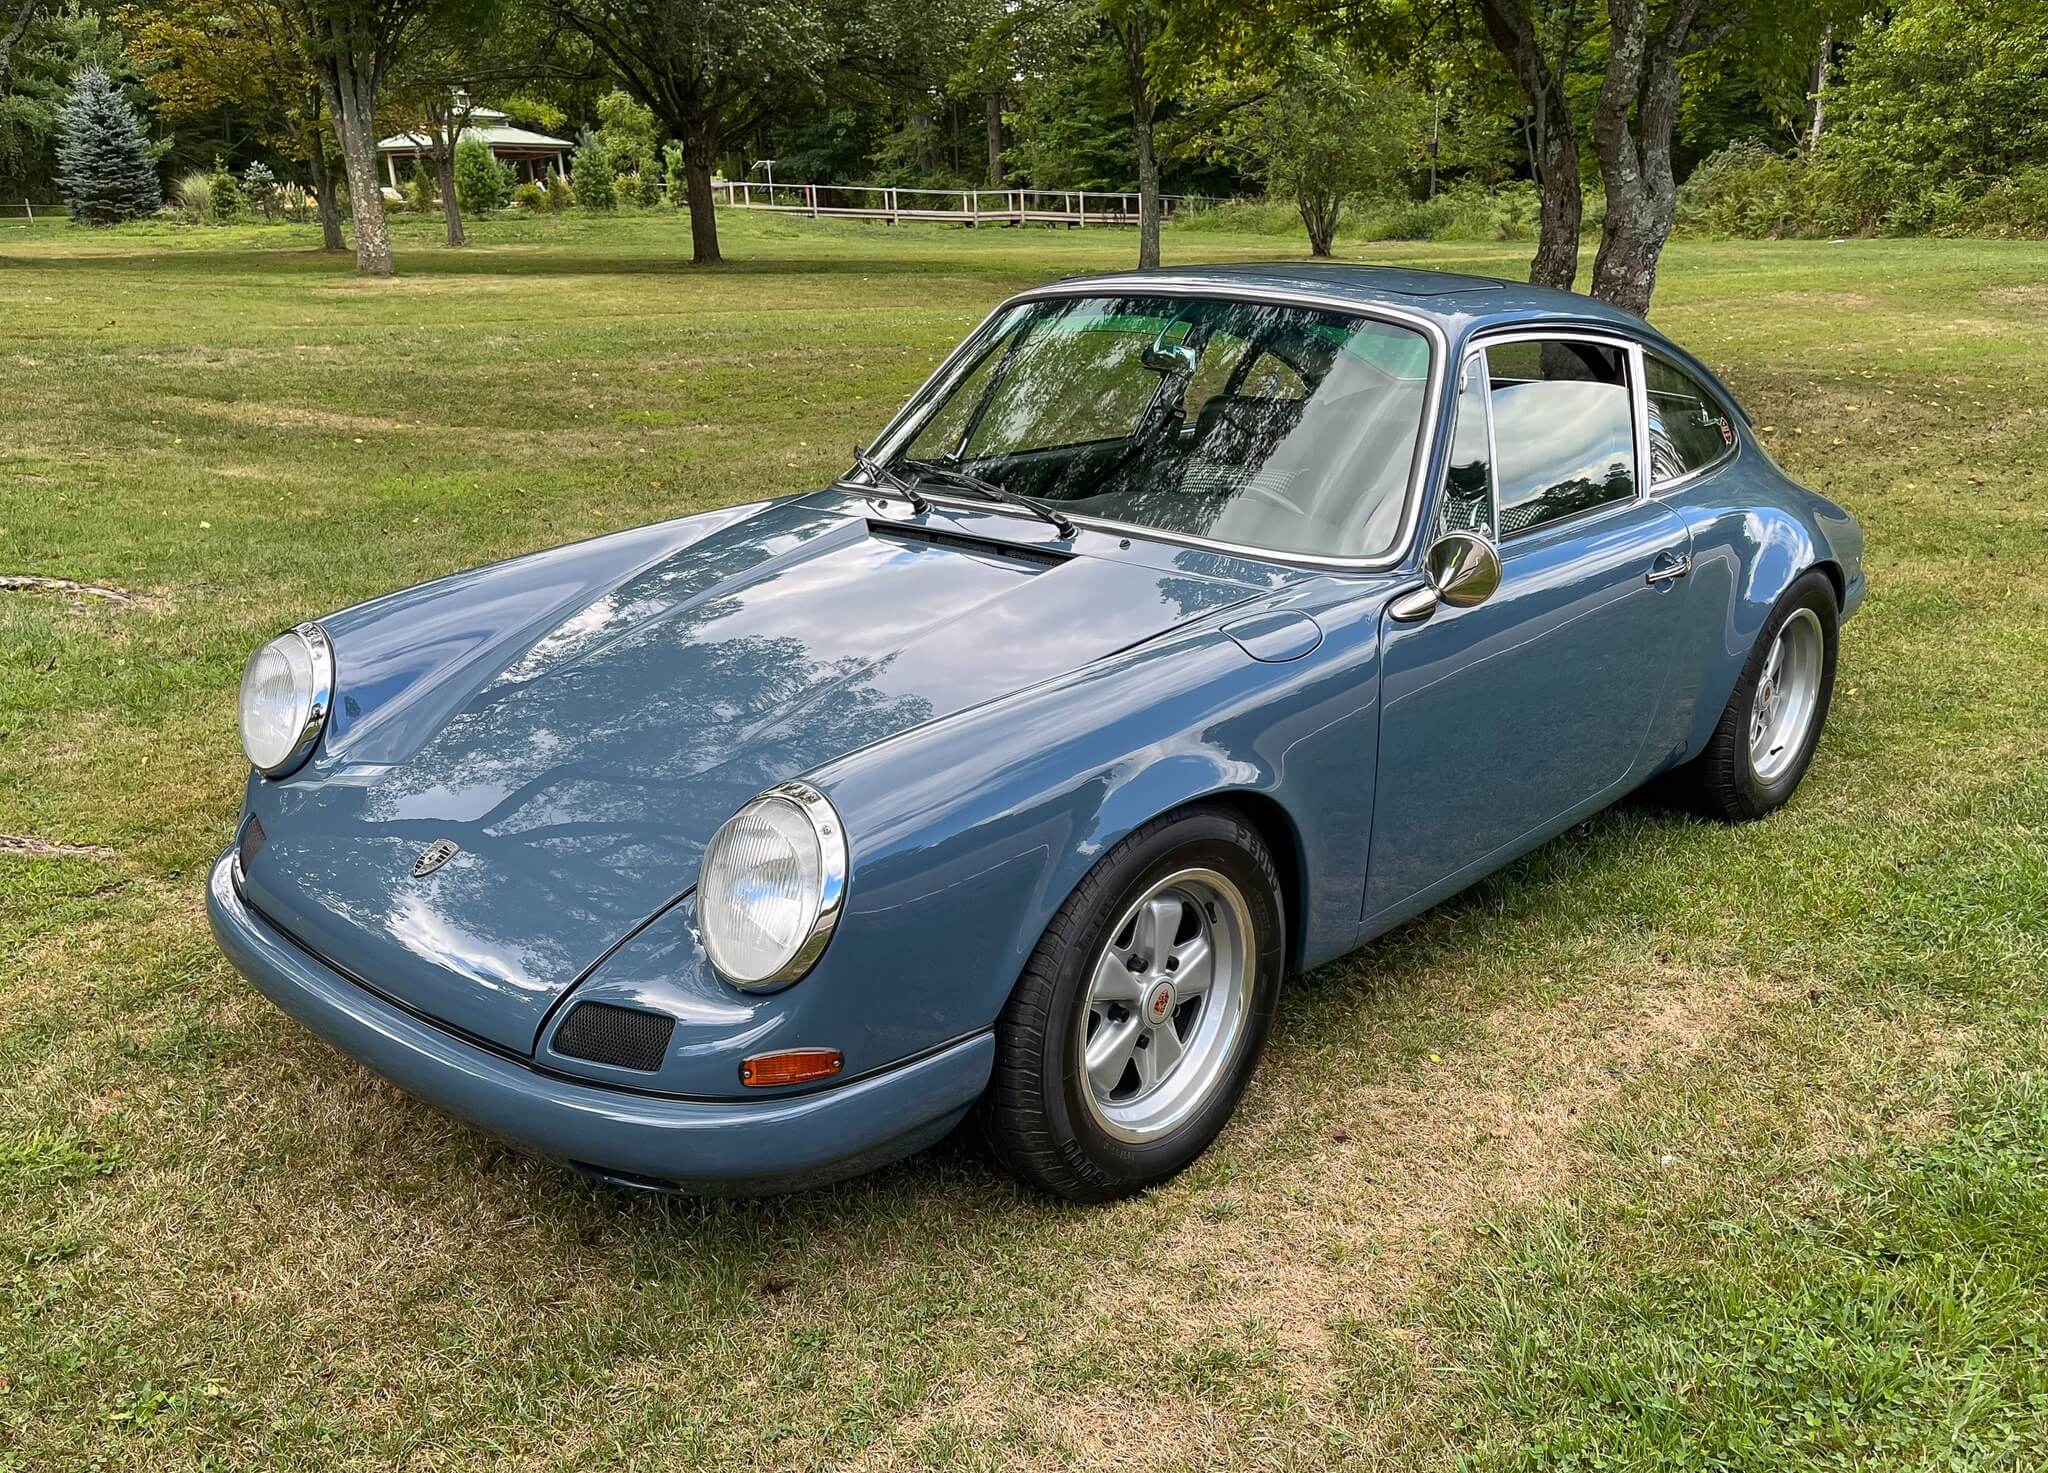 Restored 1980 Porsche 911SC Coupe By ROCS Motorsports Up For Sale